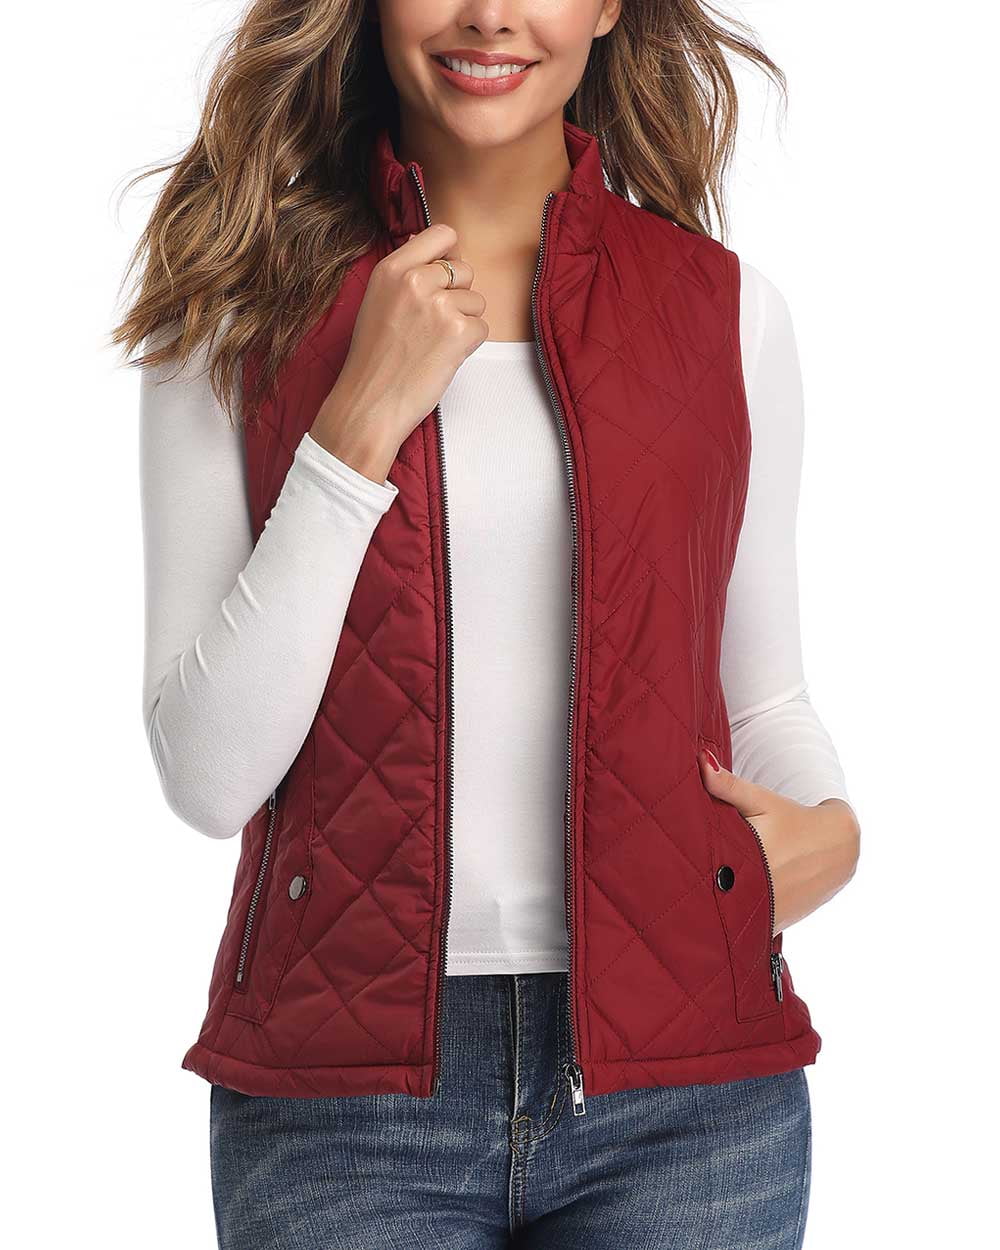 Women's Basic Quilted Fully Lined Lightweight Zip Up Hoodie Vest S,M,L,XL